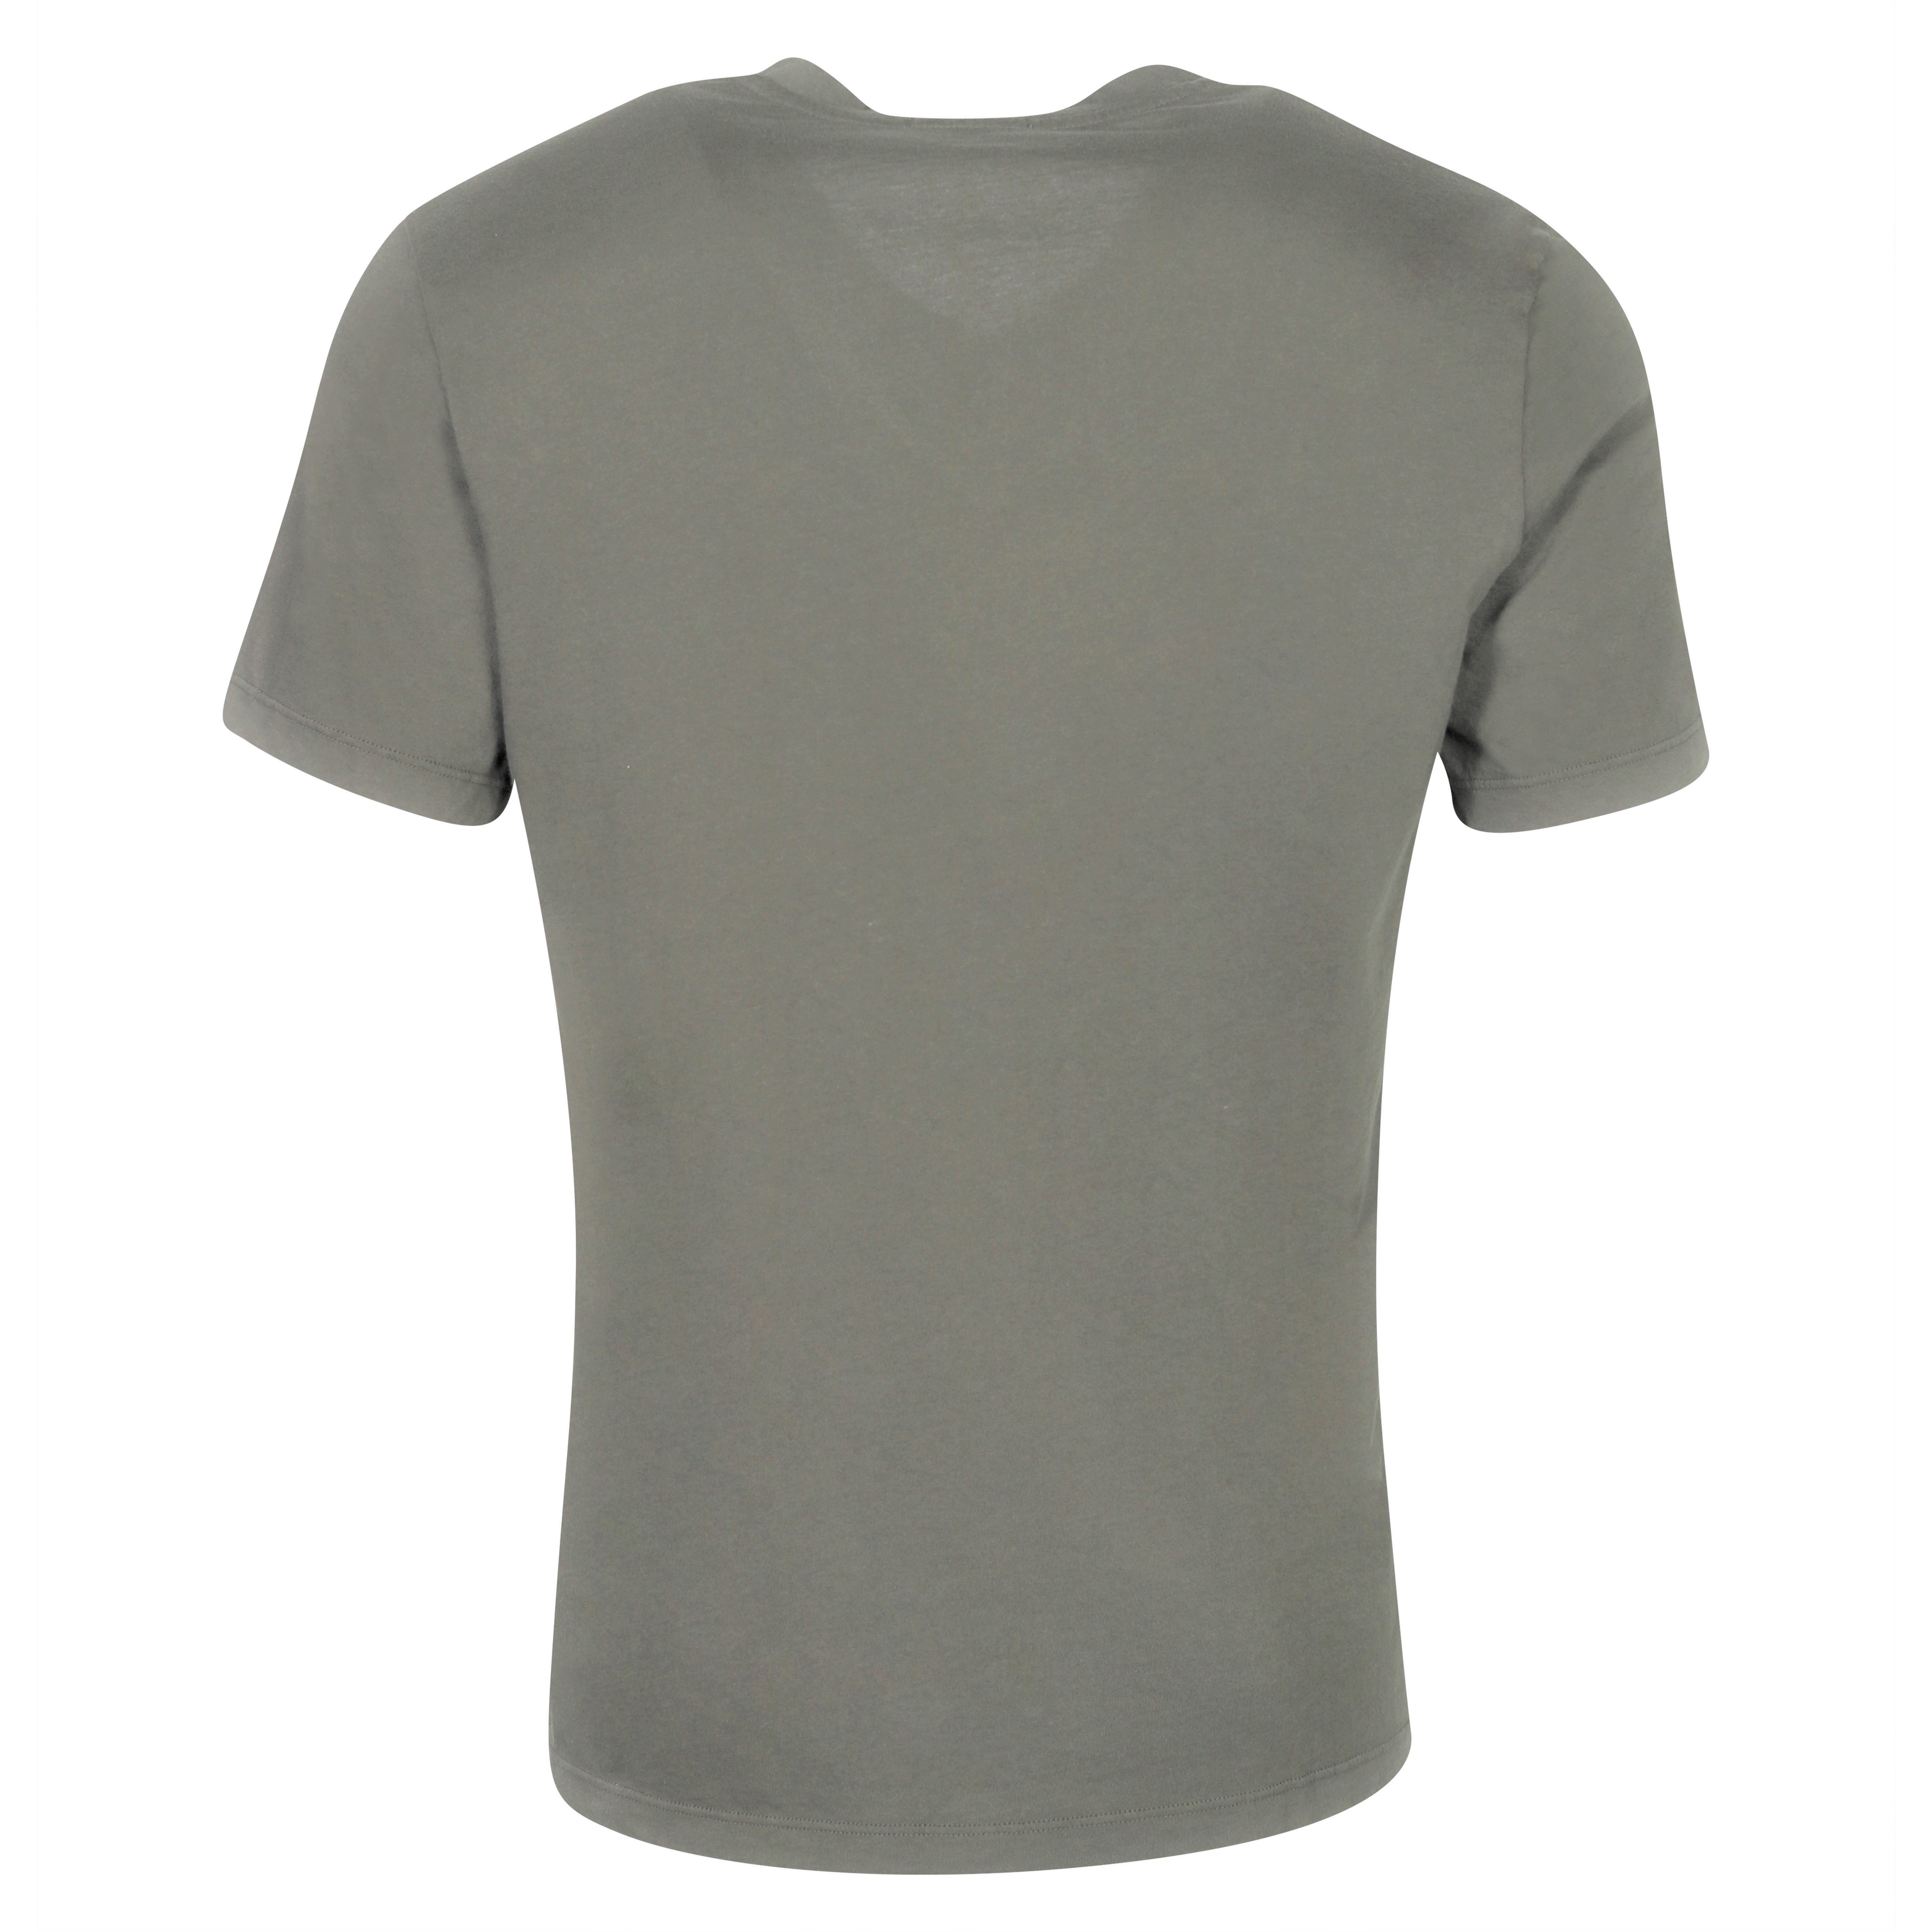 James Perse T-Shirt V-Neck in Jungle M